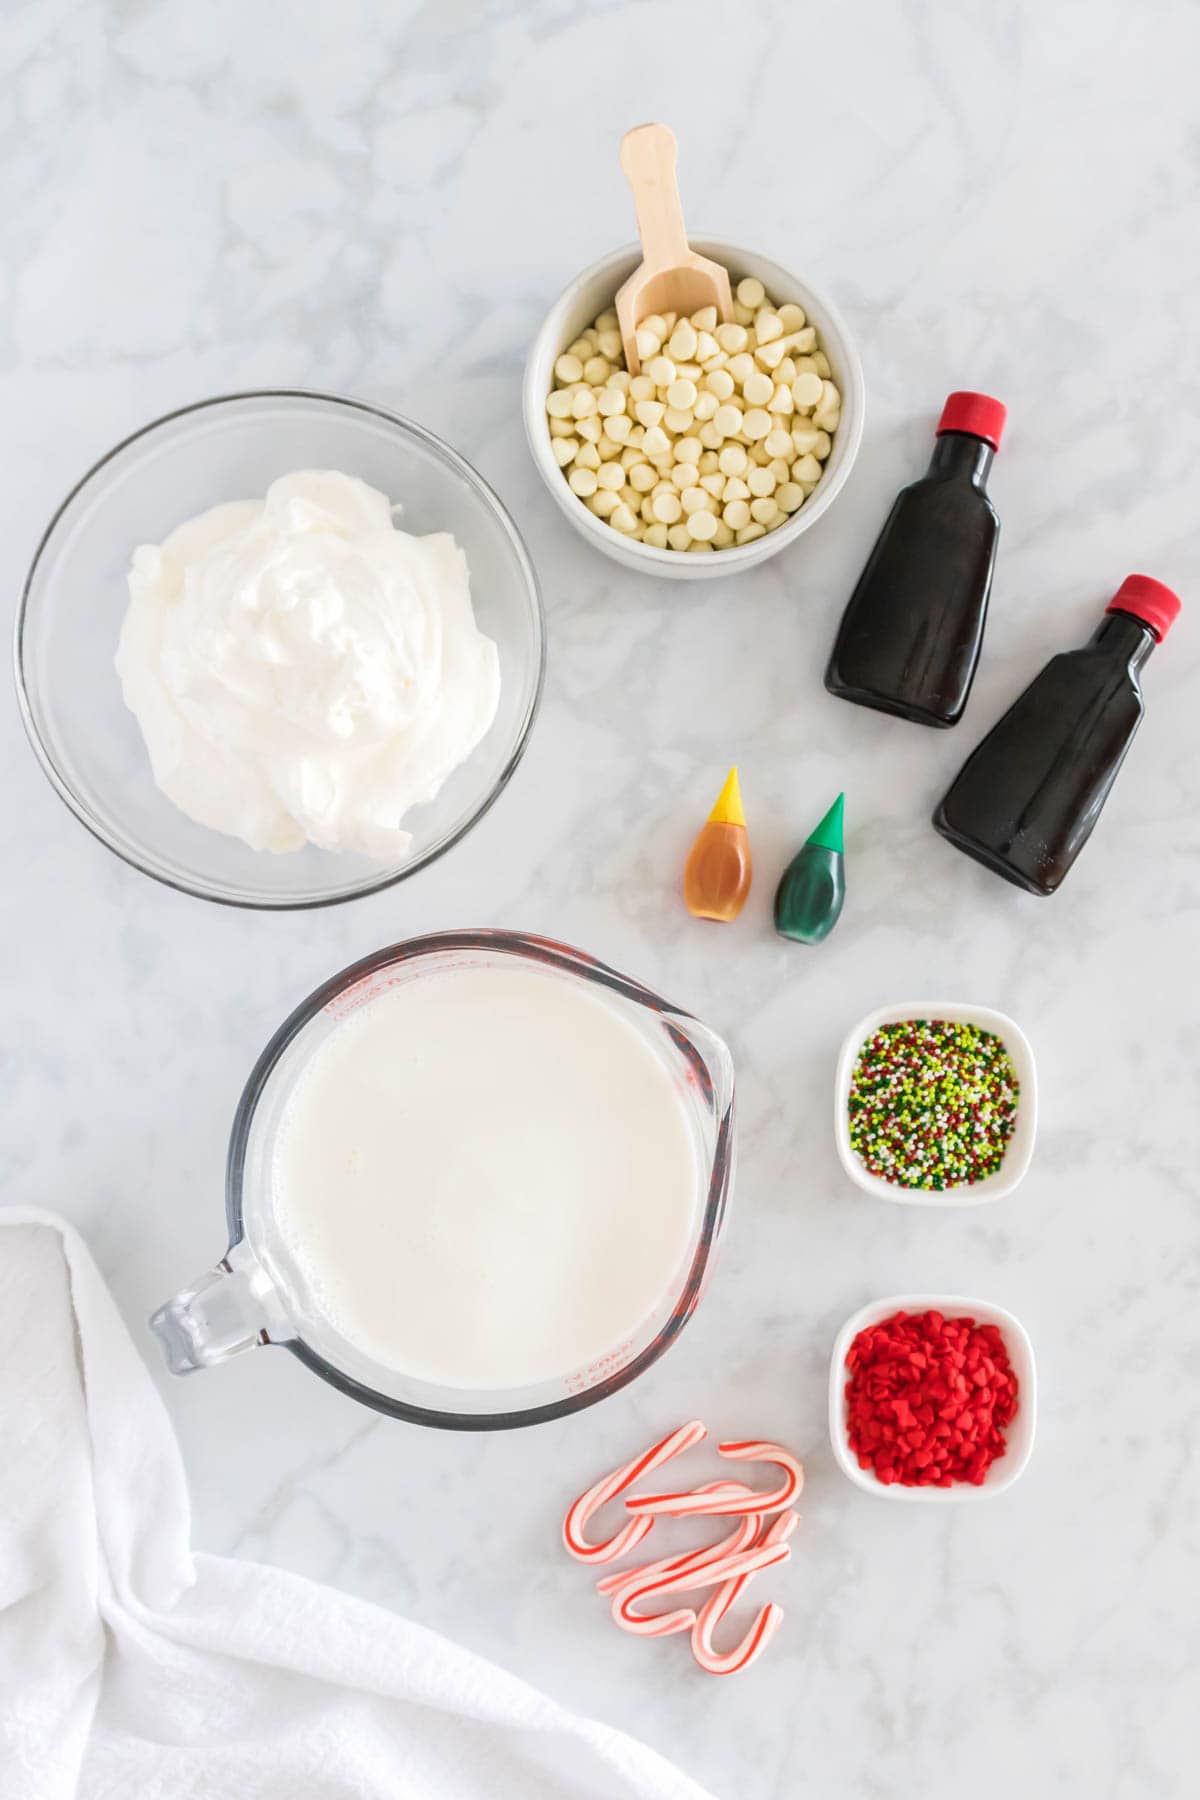 Ingredients to make peppermint hot chocolate are shown on a white background: vanilla, peppermint extract, white chocolate chips, milk, whipped cream, food coloring, sprinkles, and candy canes.